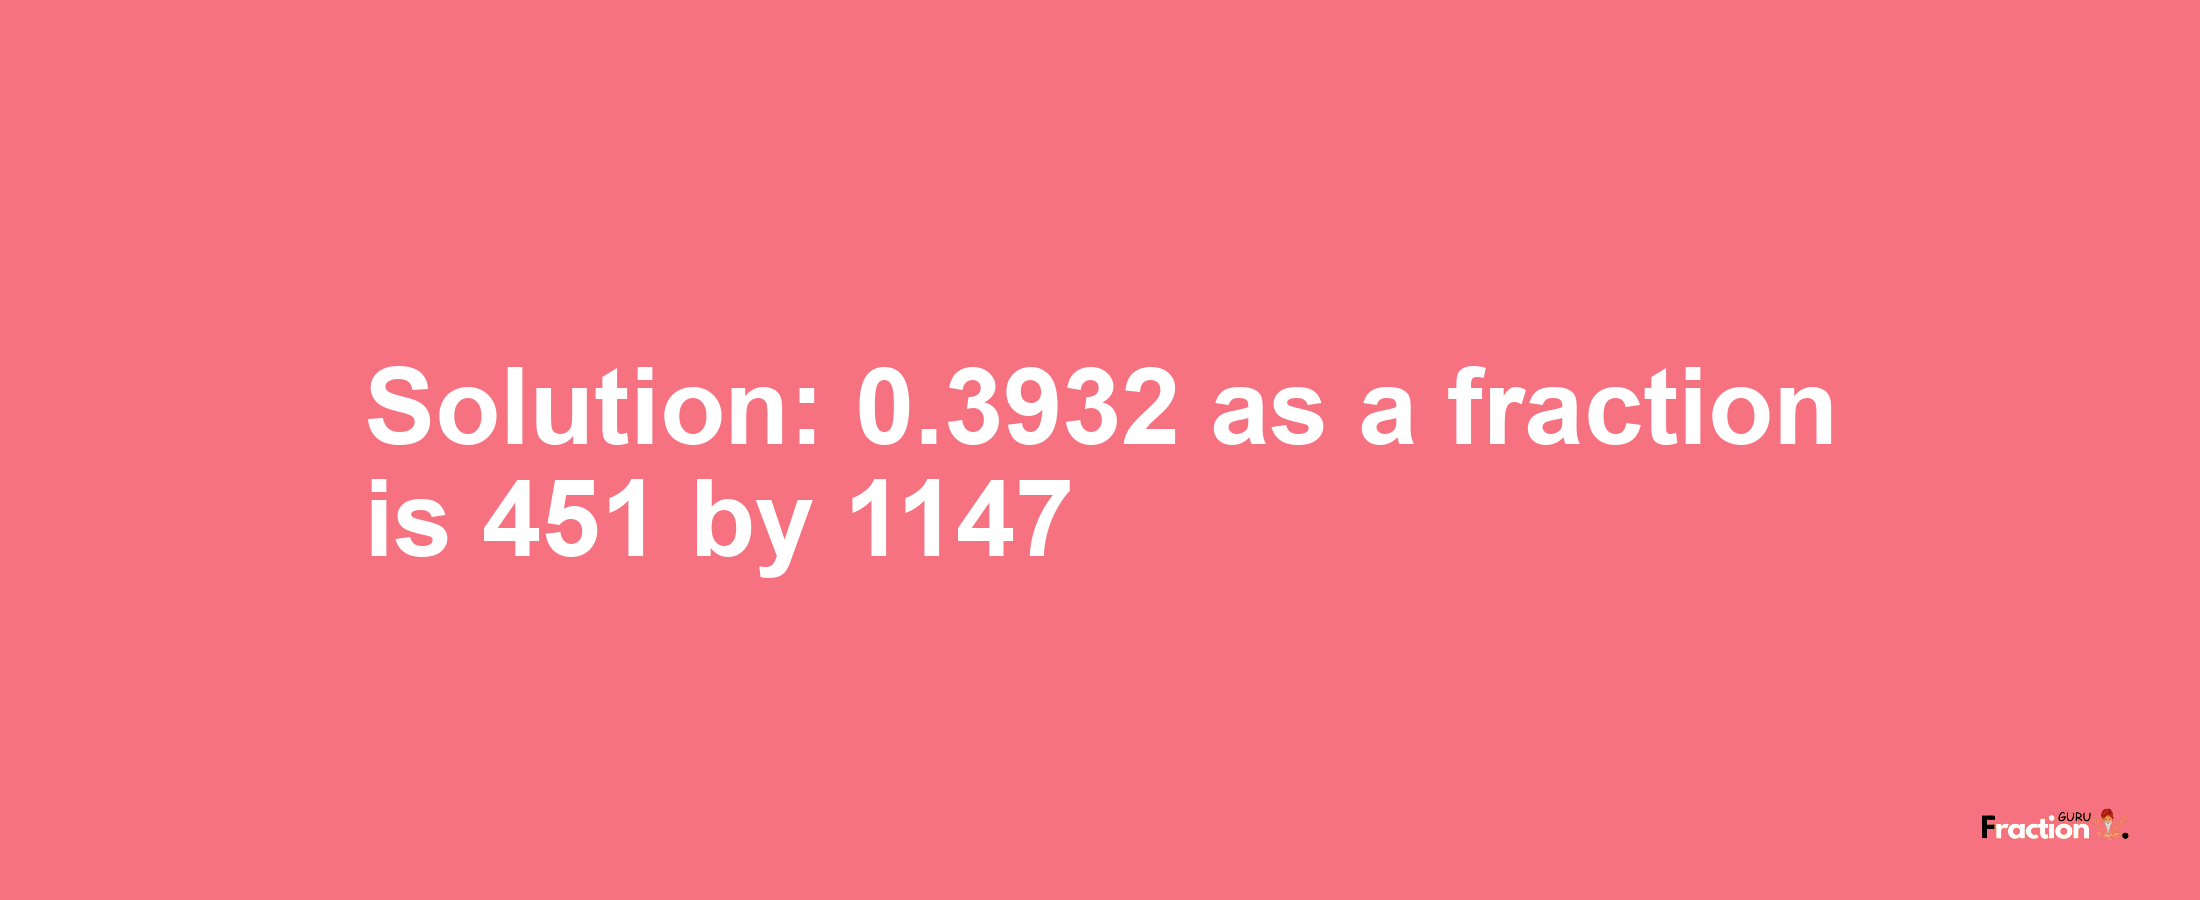 Solution:0.3932 as a fraction is 451/1147